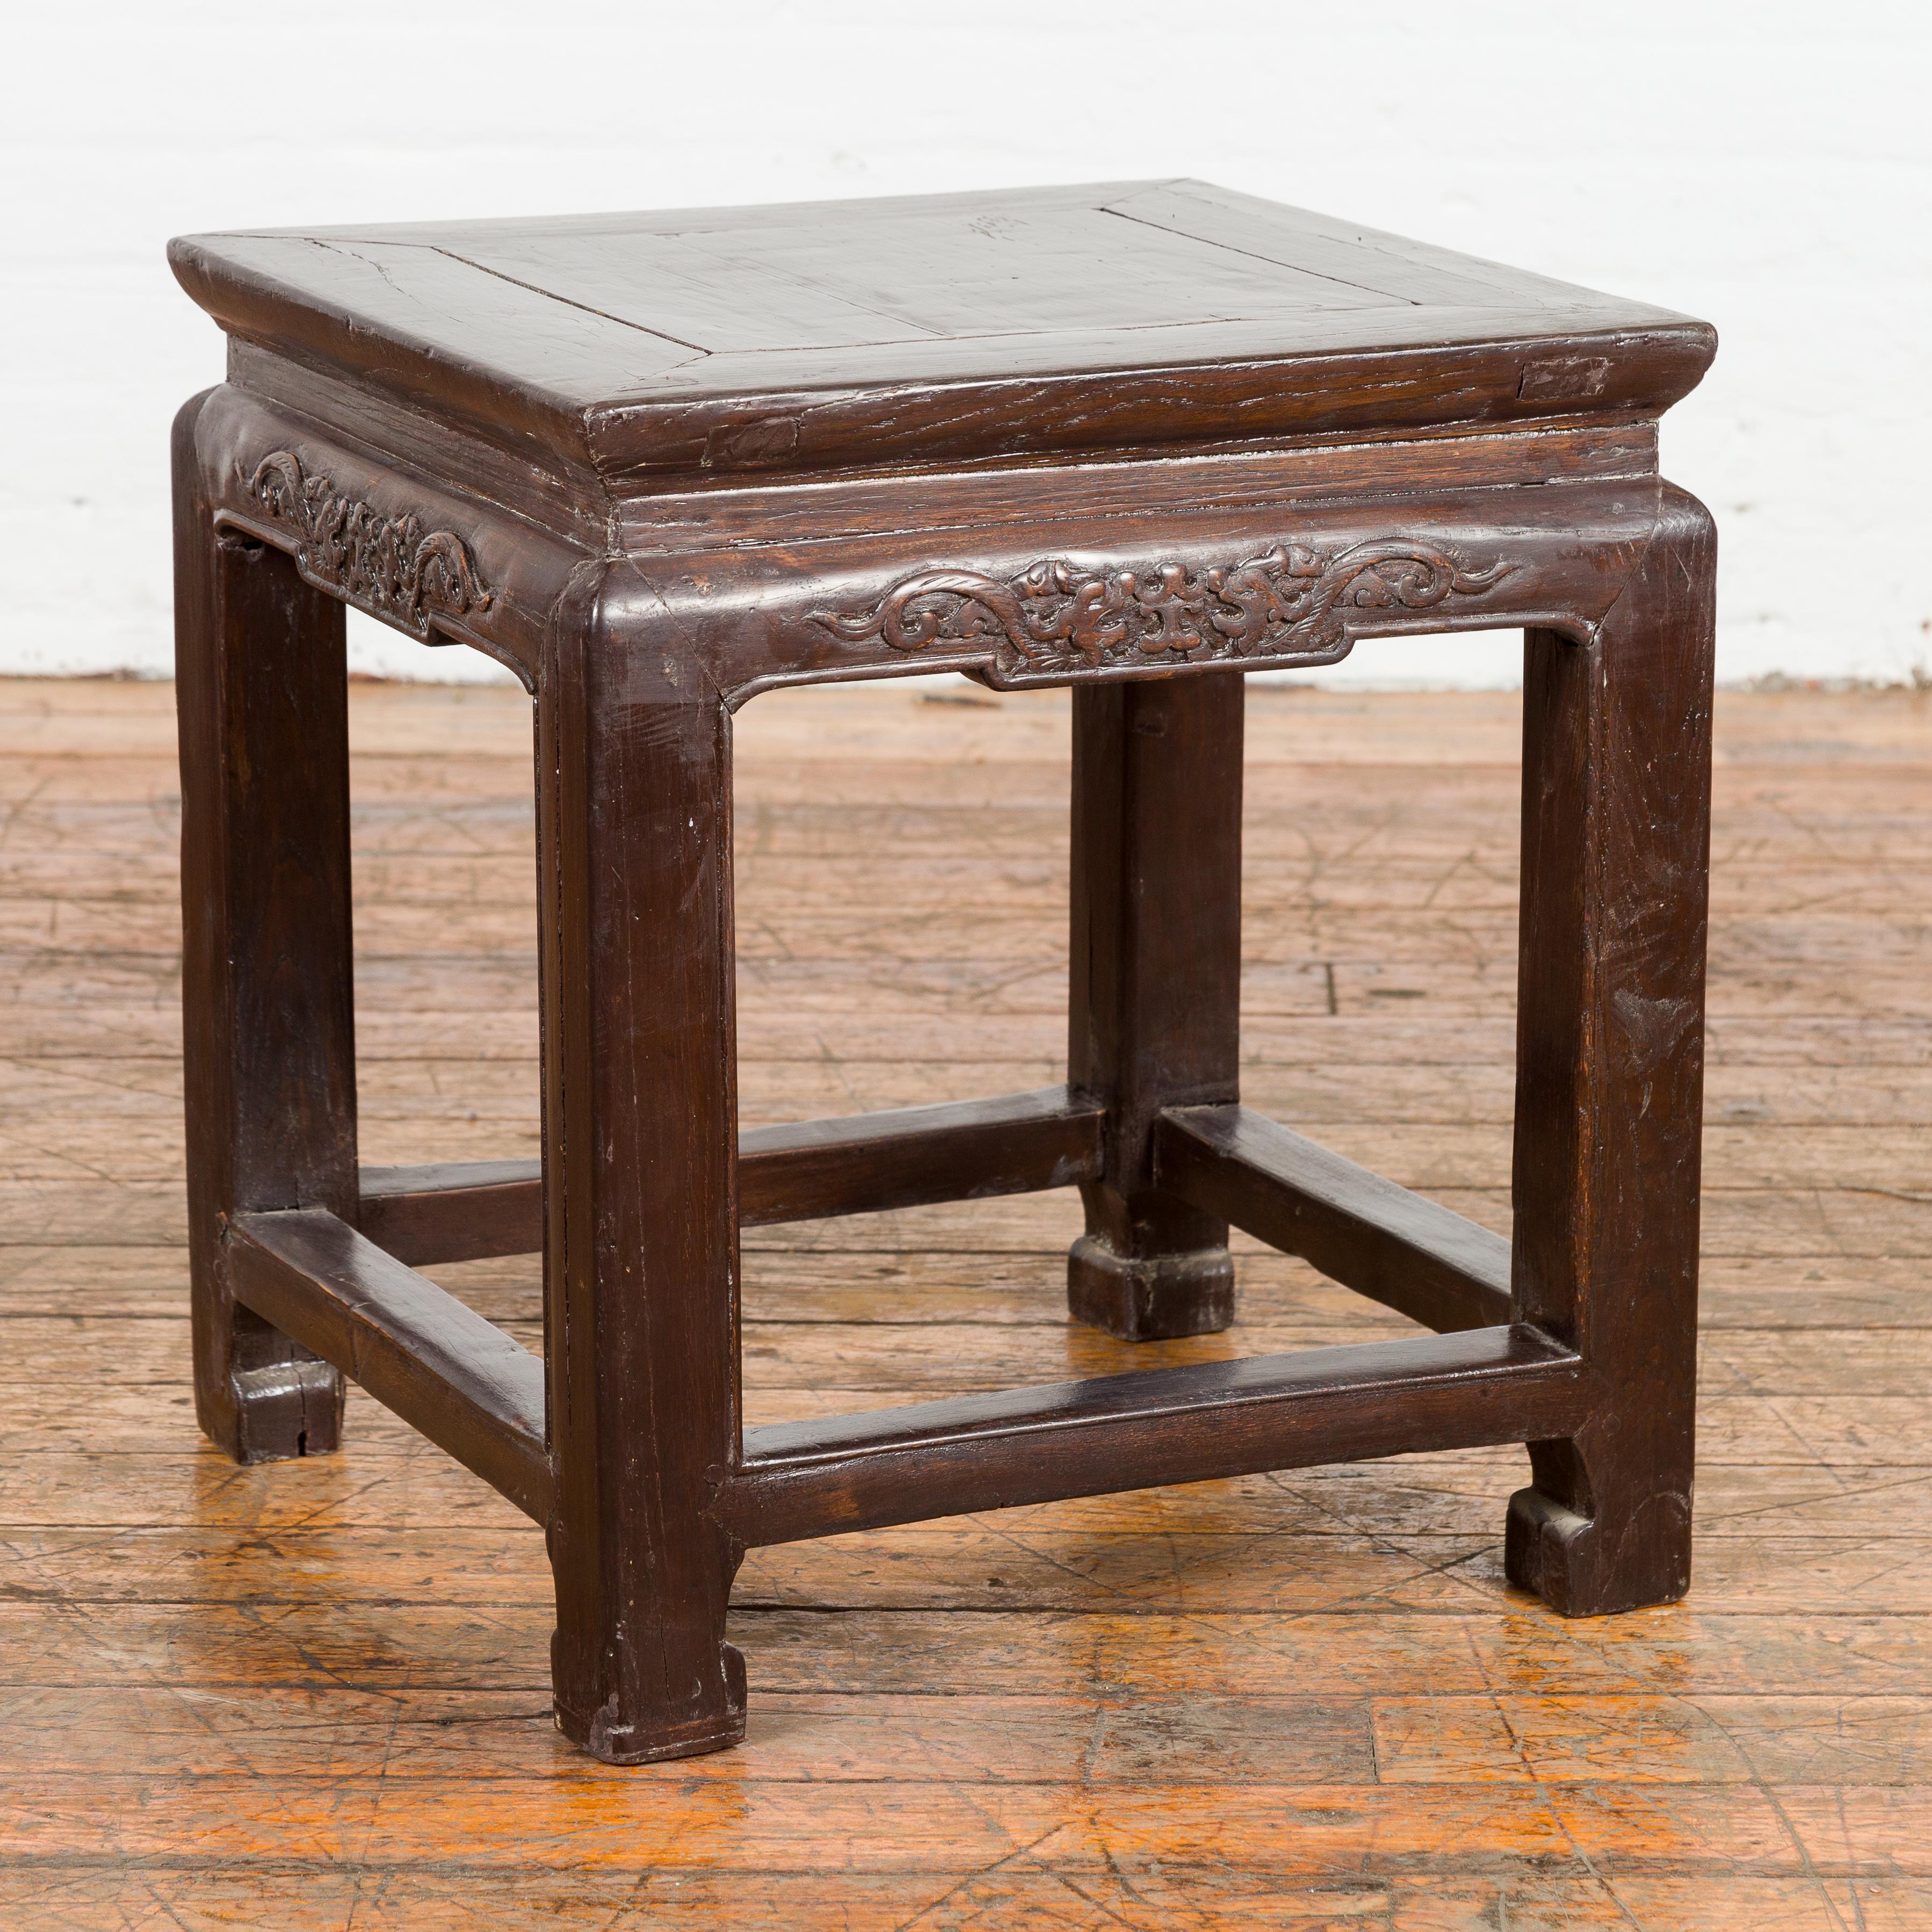 A late Qing Dynasty period side table from the early 20th century with waisted top, carved apron, horse hoof legs, and side stretchers. This late Qing Dynasty period side table, hailing from the early 20th century, is a true testament to the